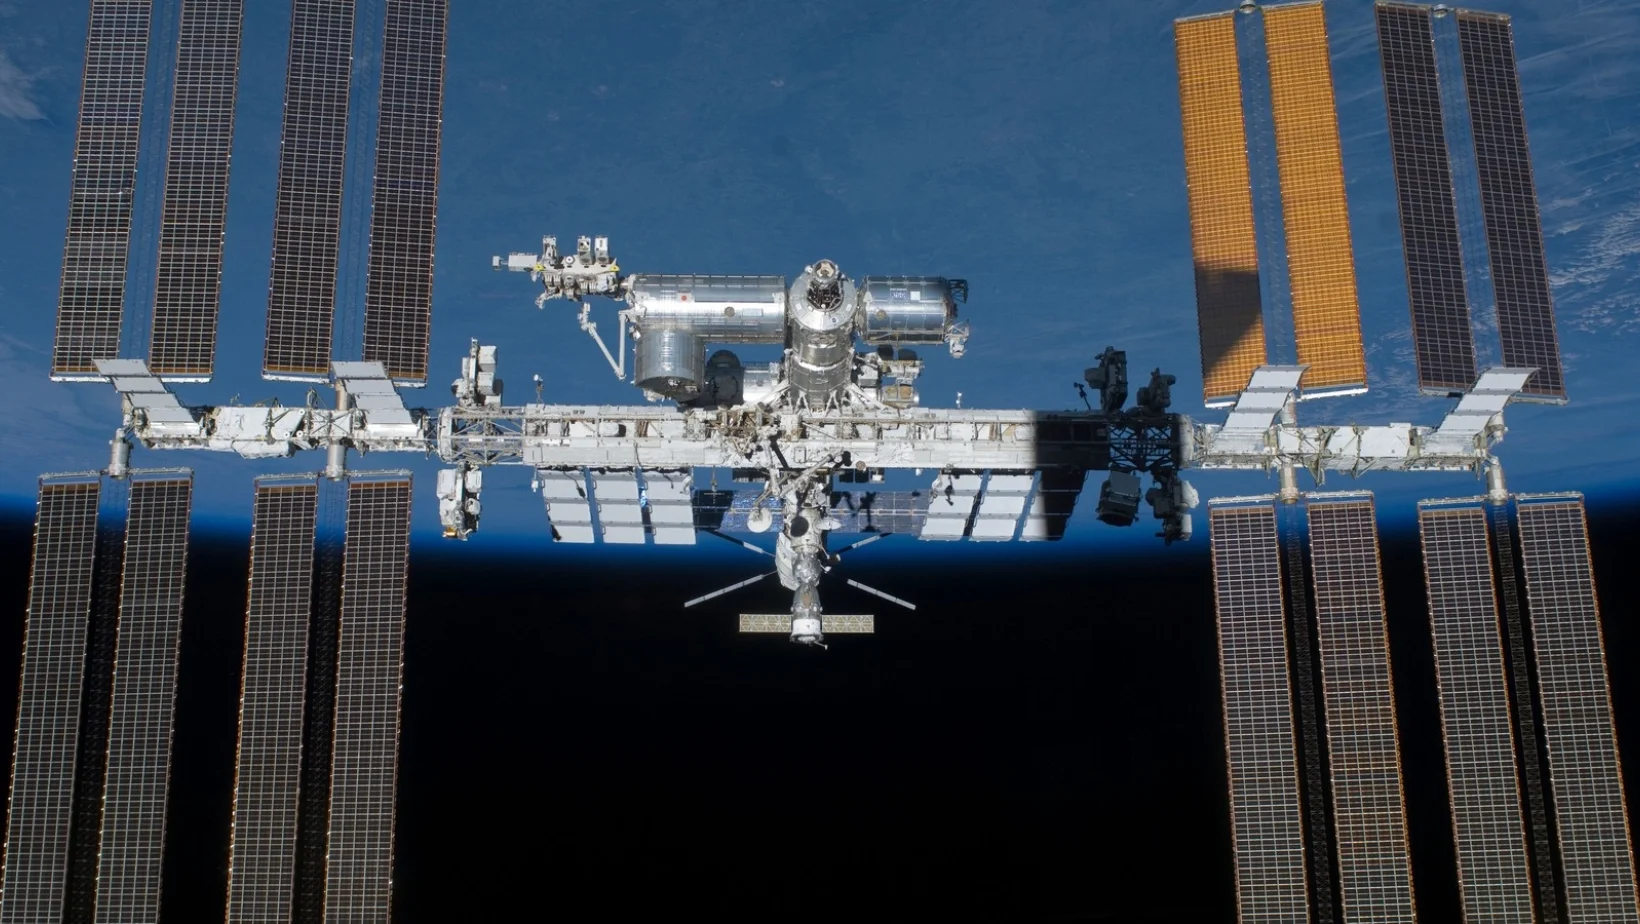 Fascinating facts about the ISS